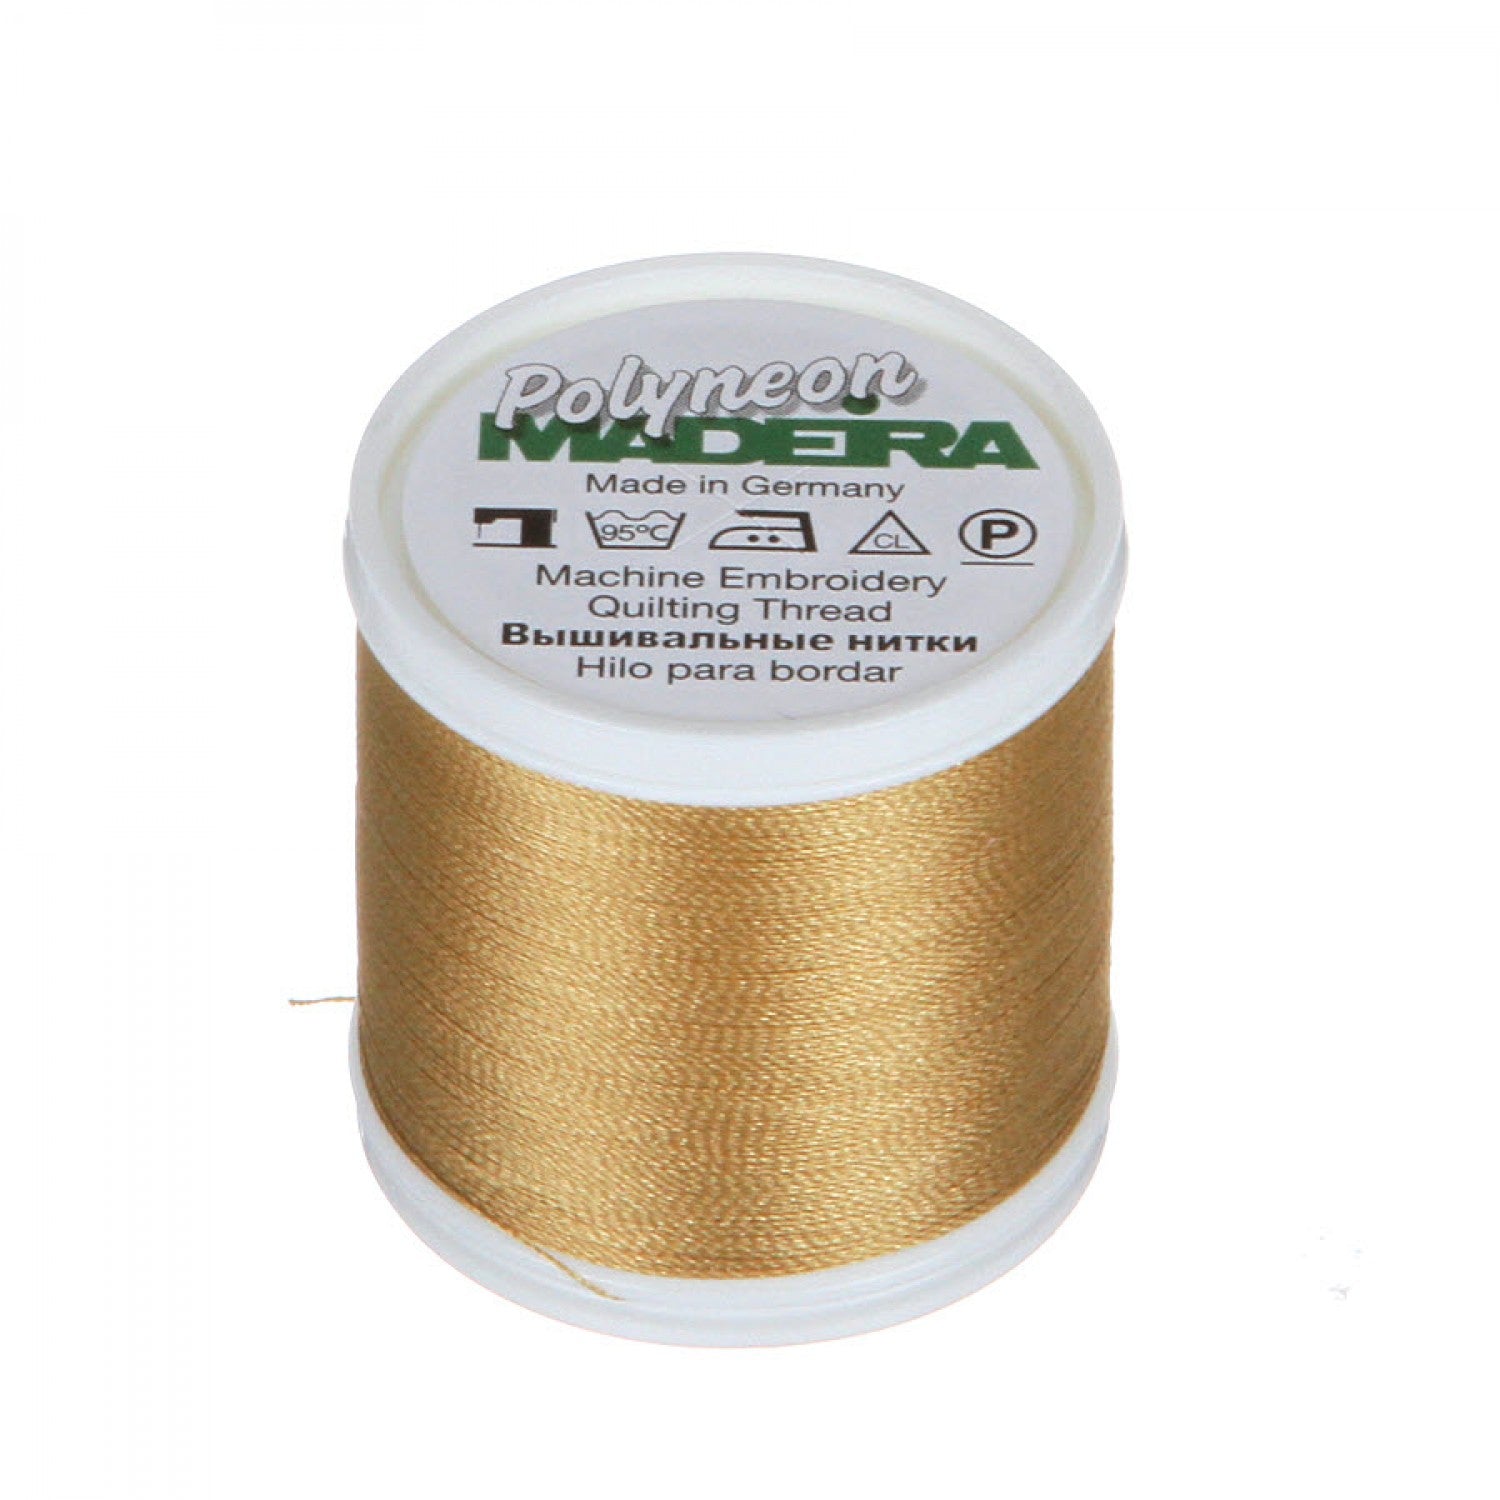 Khaki Brown Gold Color -- Ref. # 1673 -- Polyneon Machine Embroidery Thread -- (#40 / #60 Weights) -- Various Sizes by MADEIRA®